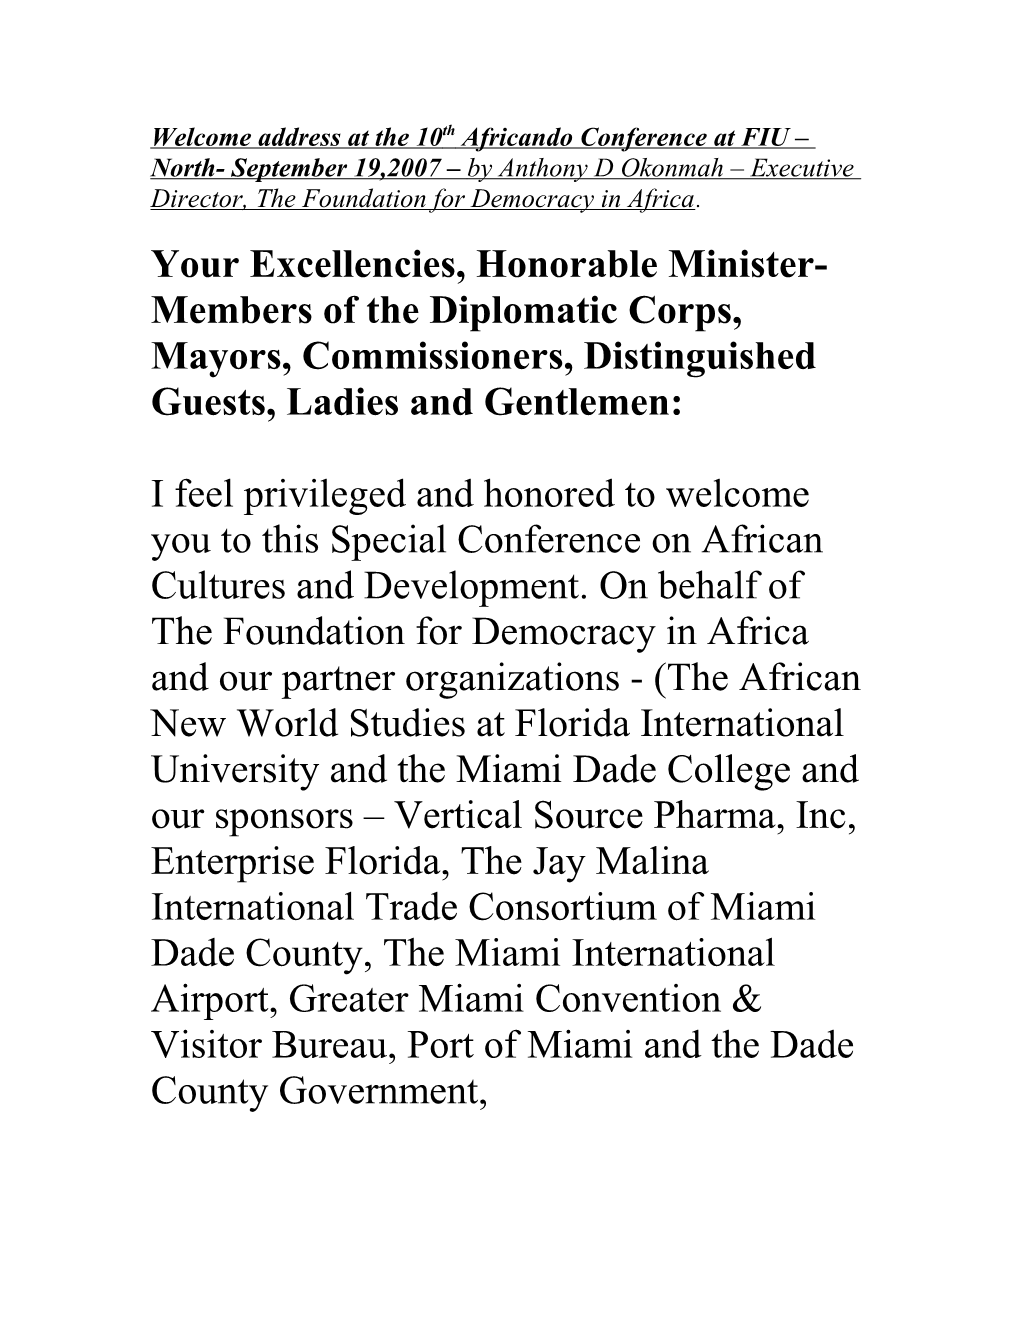 Welcome Address at the 10Th Africando Conference at FIU North- September 19,2007 by Anthony